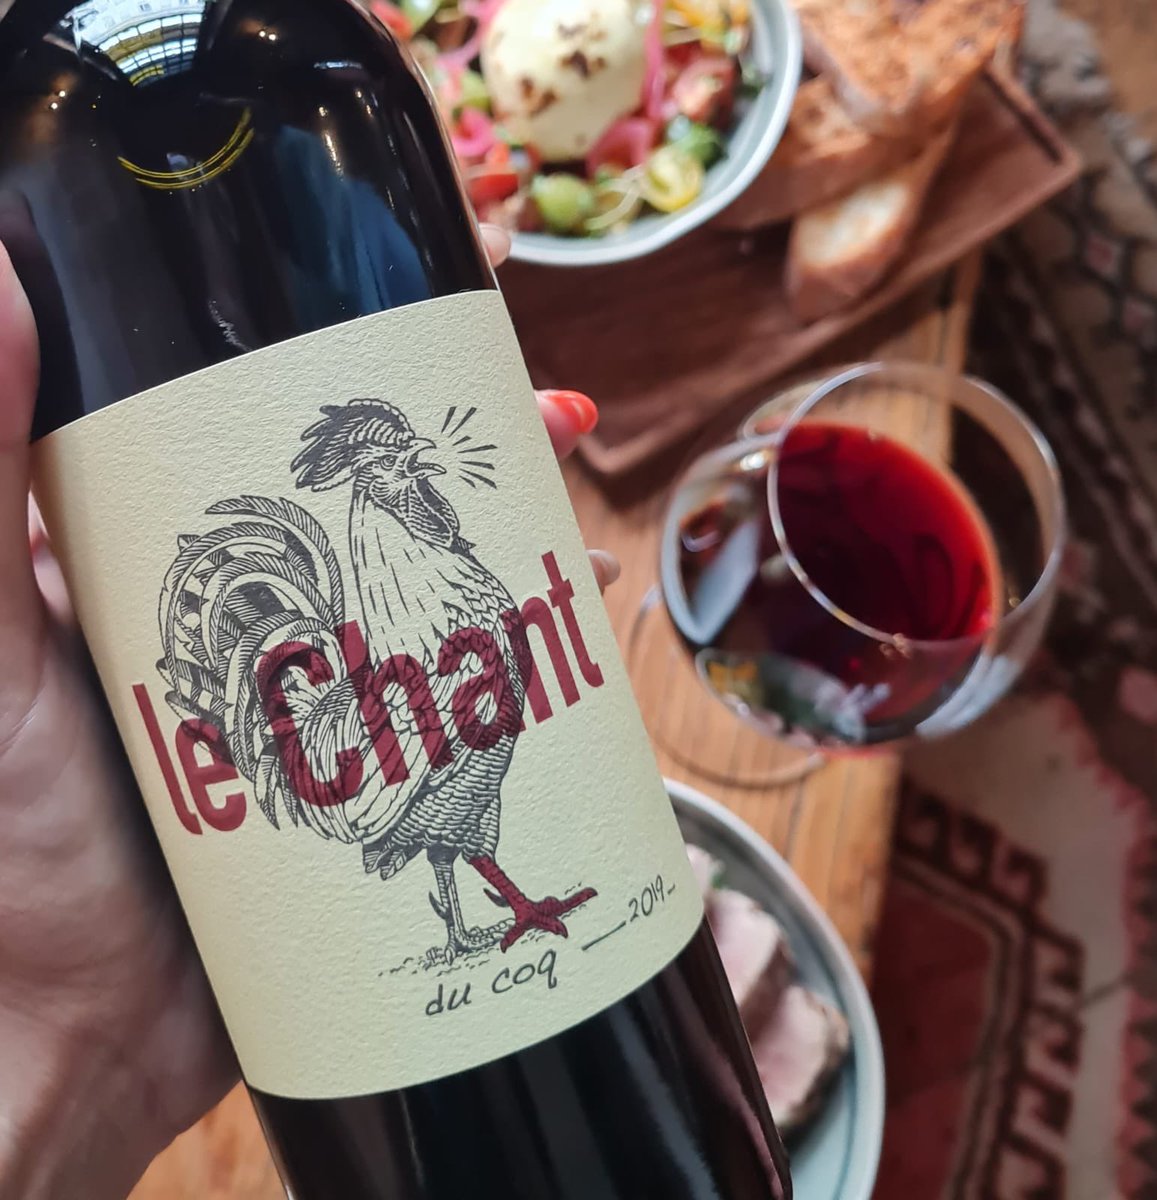 Putting the best foot forward this week🍷 @lechantwines #redblend #lechantwines #winesofsouthafrica